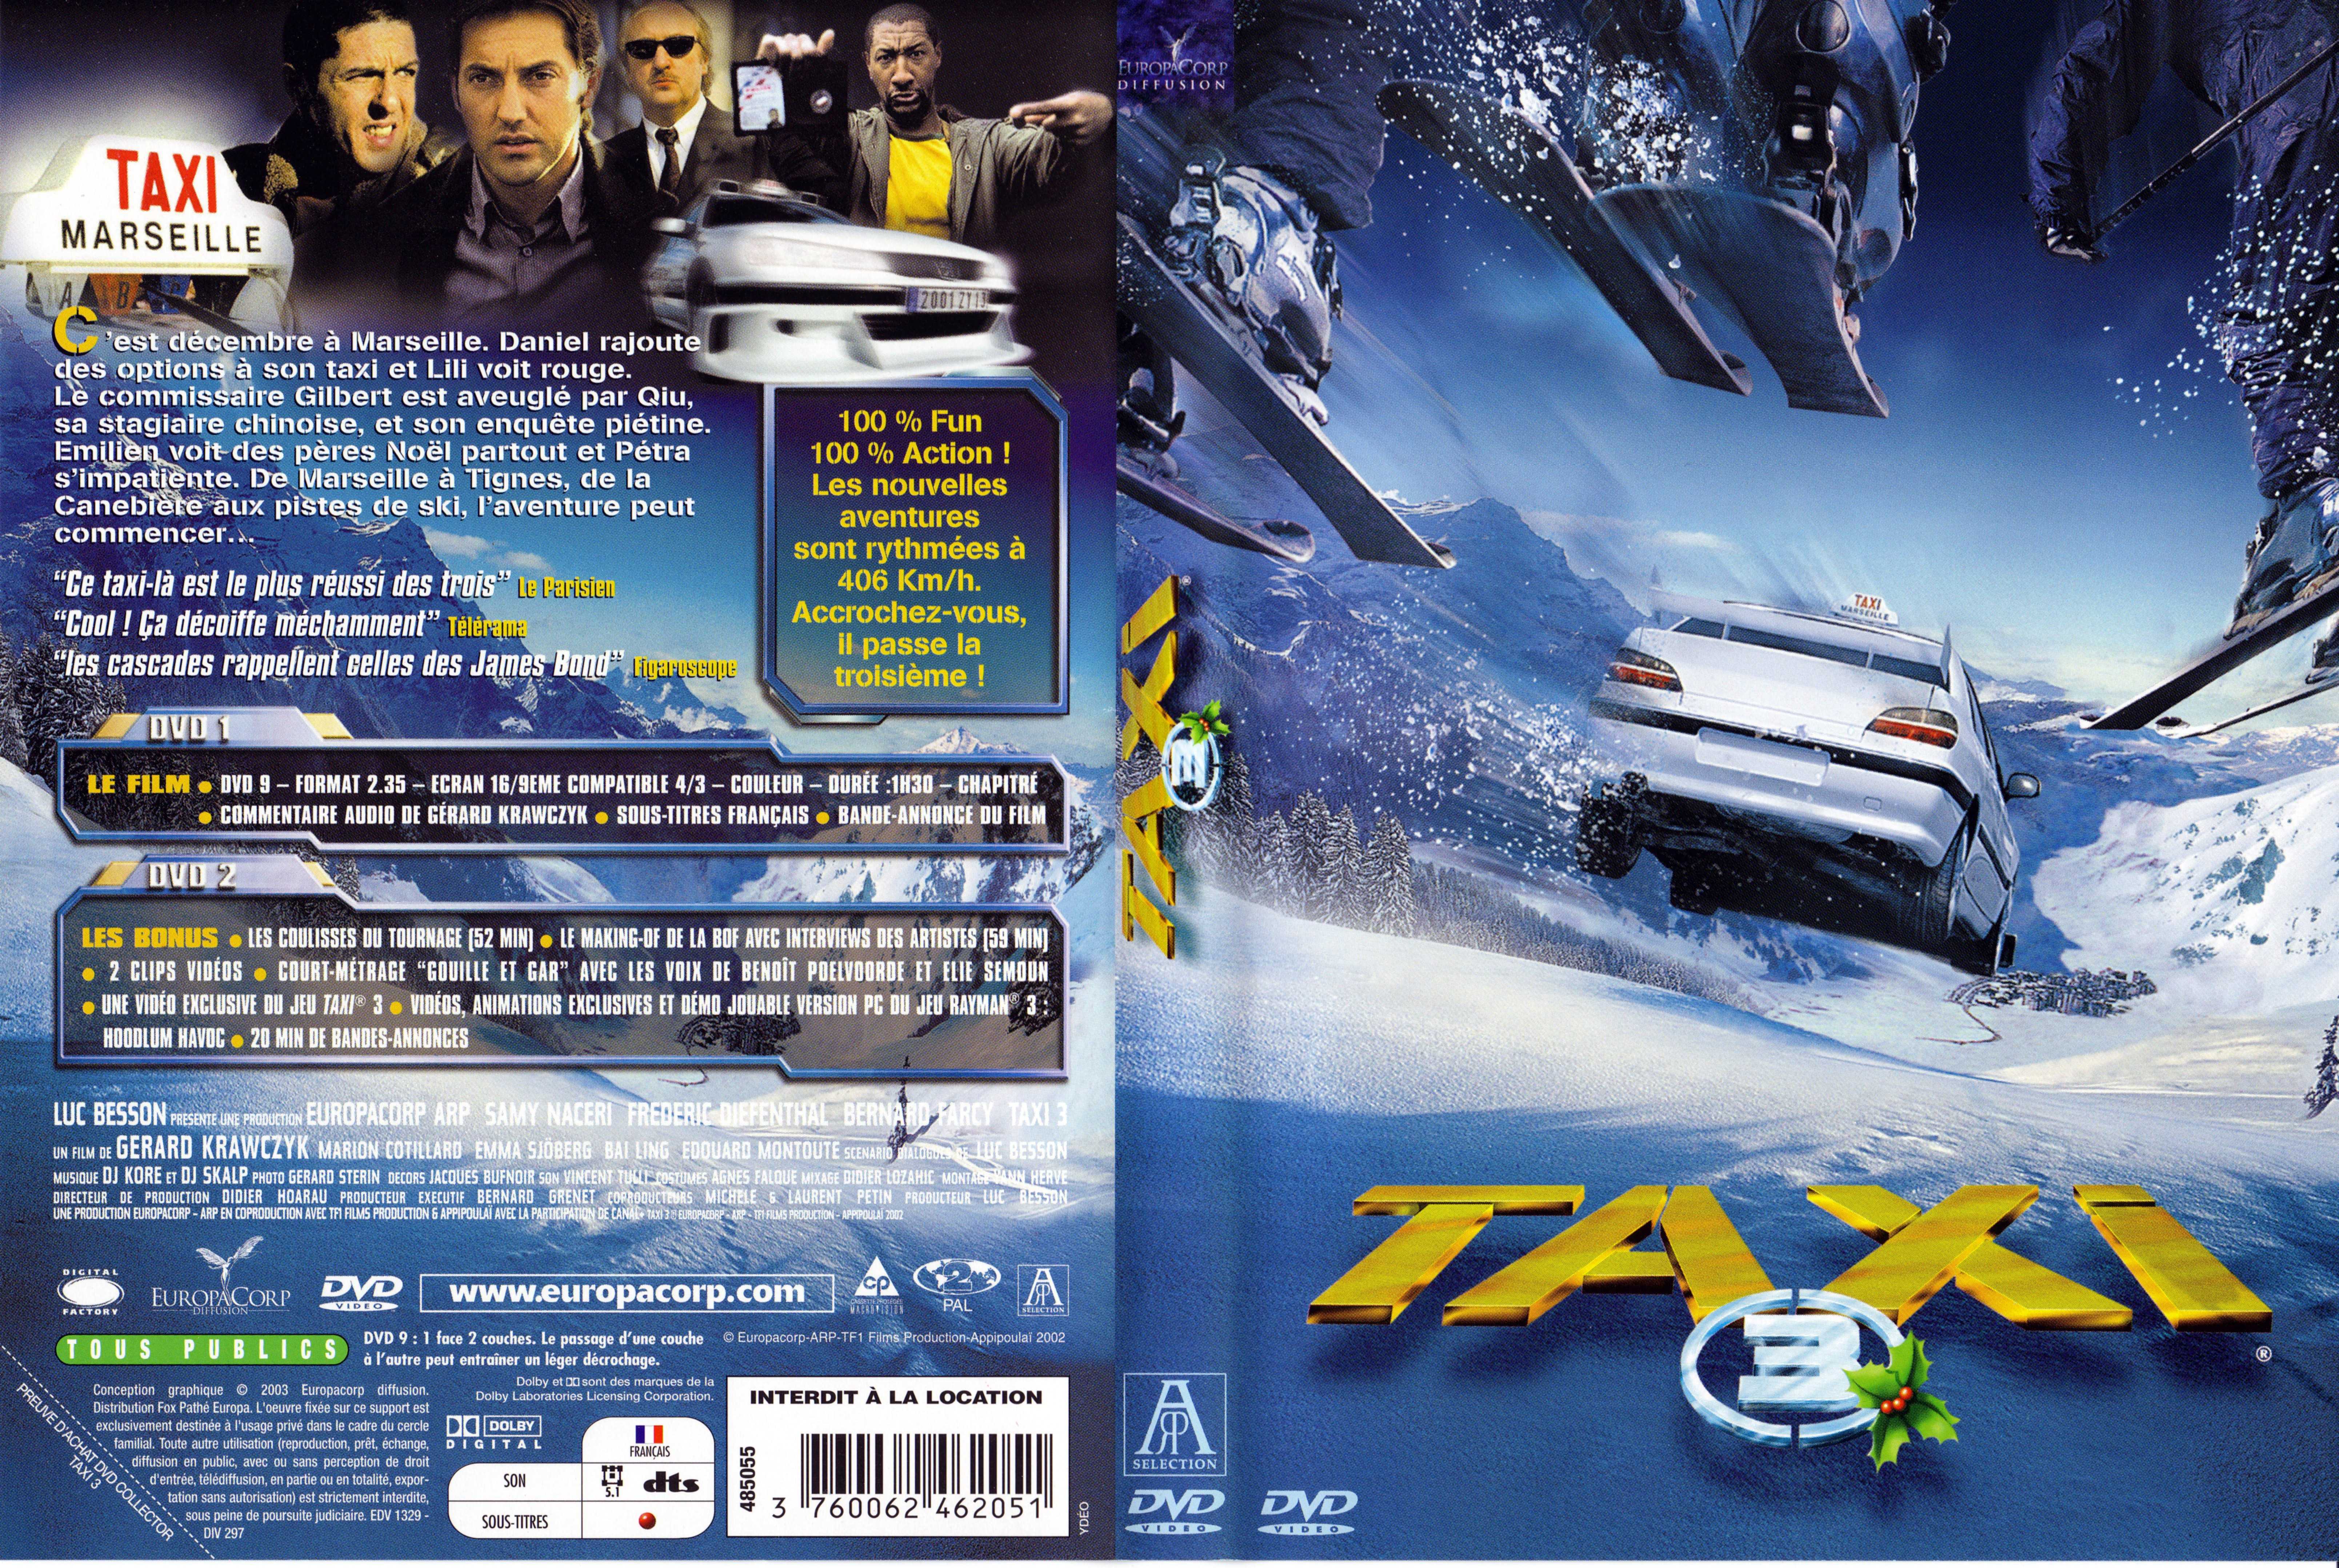 Jaquette DVD Taxi 3